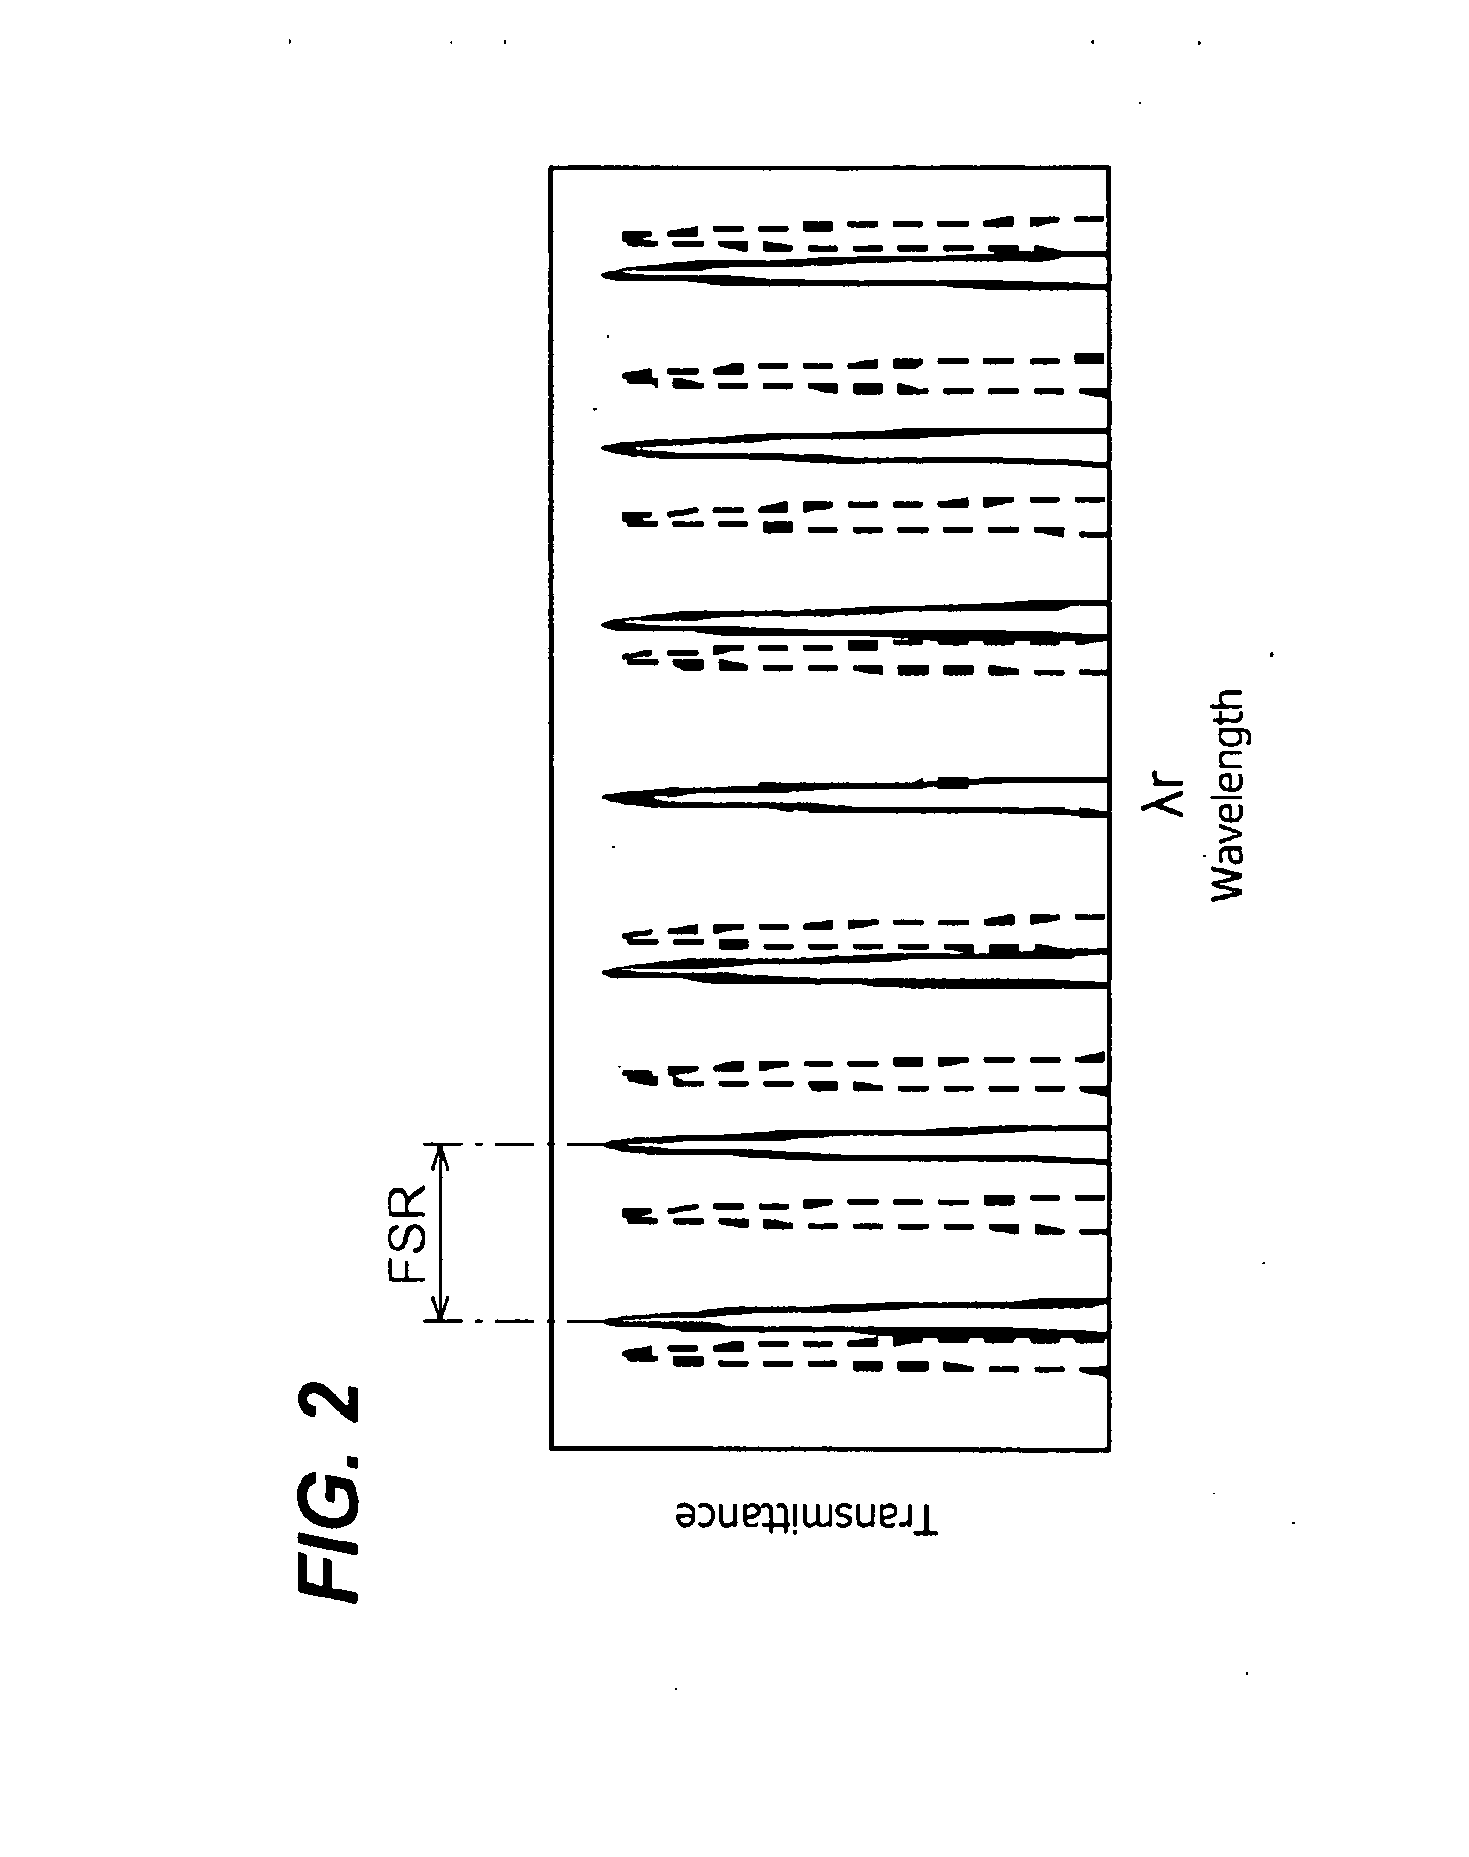 Light-emitting device with precisely tuned and narrowed spectral width of optical output and an optical signal source providing the same